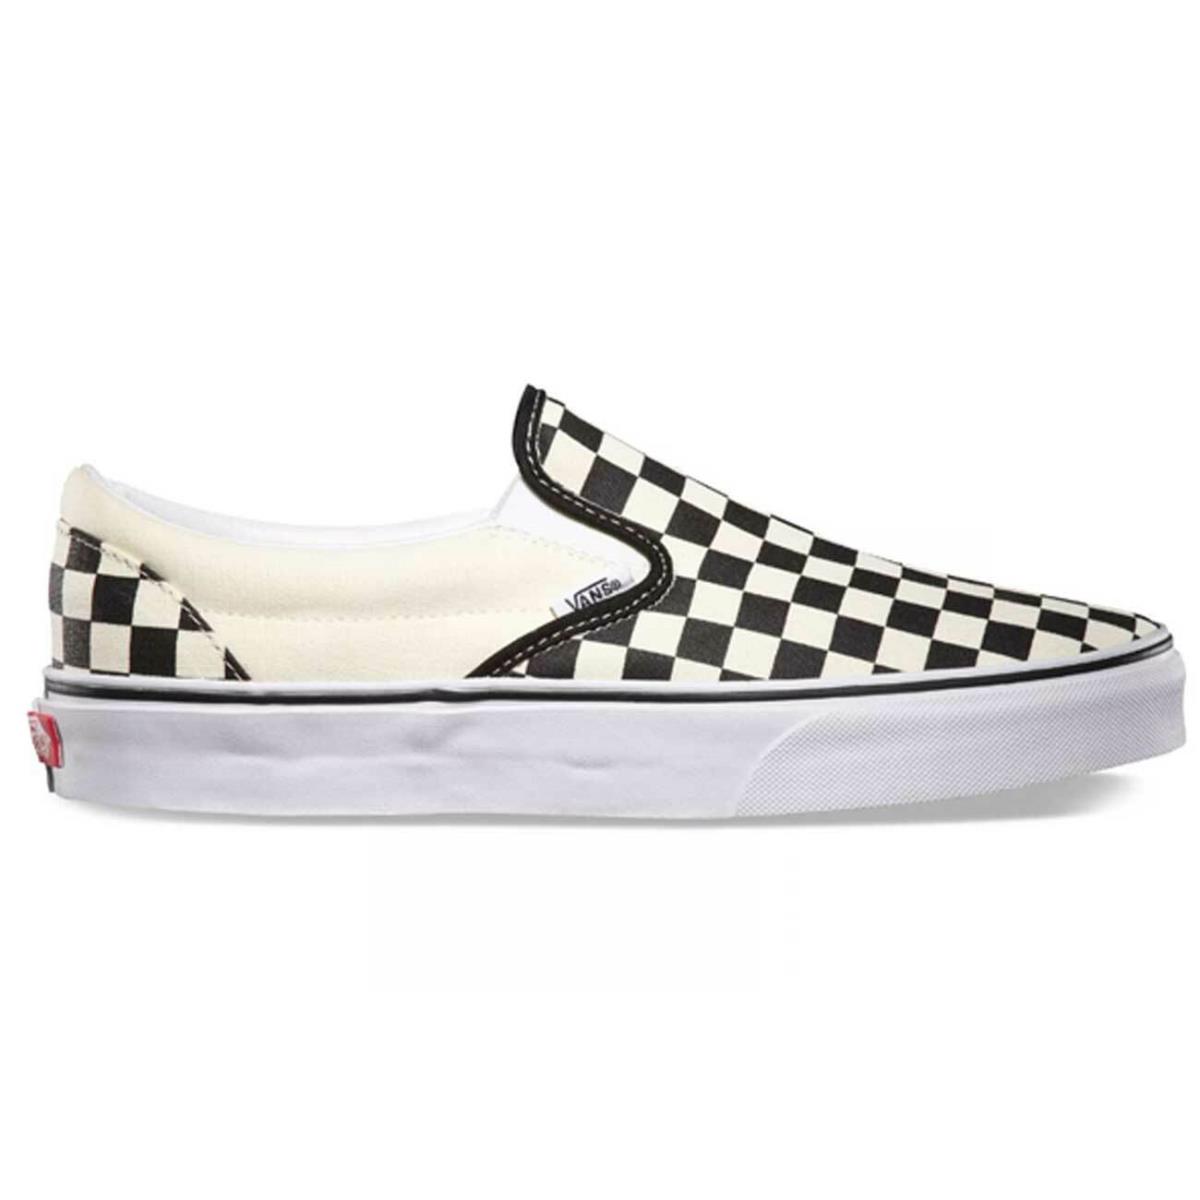 Vans Classic Slip-on Checkerboard VN000EYEBWW Unisex Casual Shoes - Multicolor